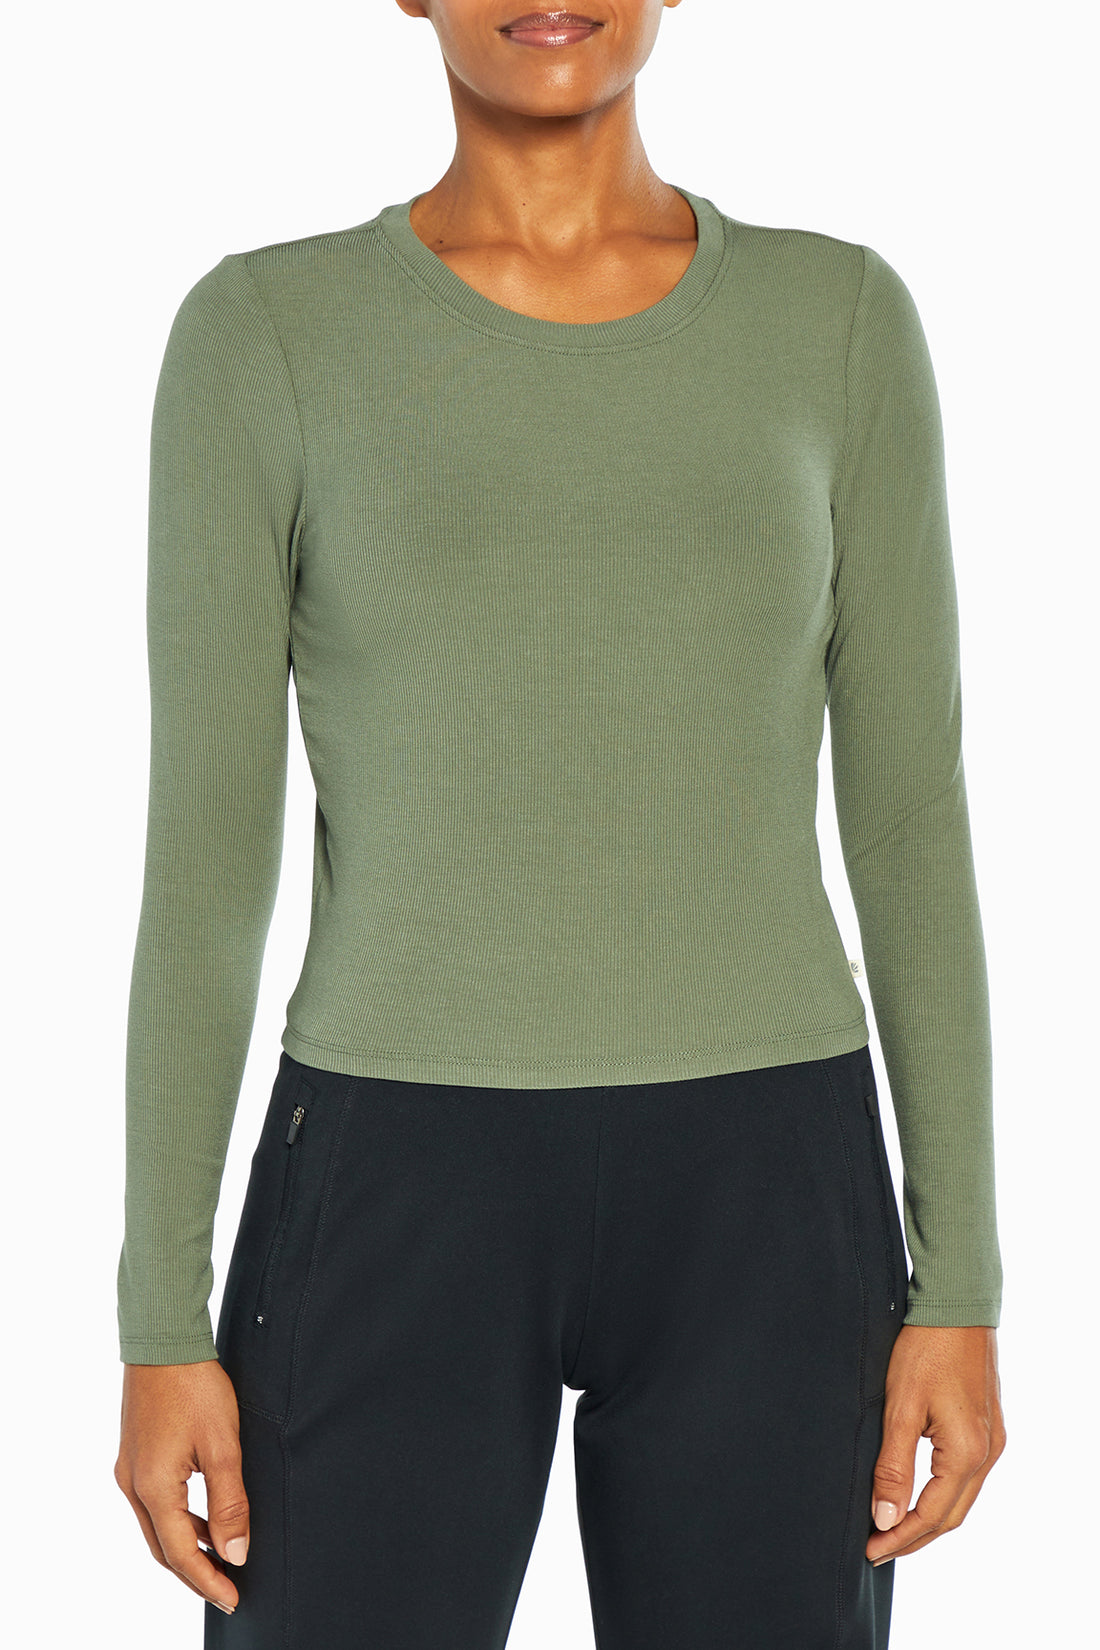 WEEKEND by marika Women's Activewear On Sale Up To 90% Off Retail